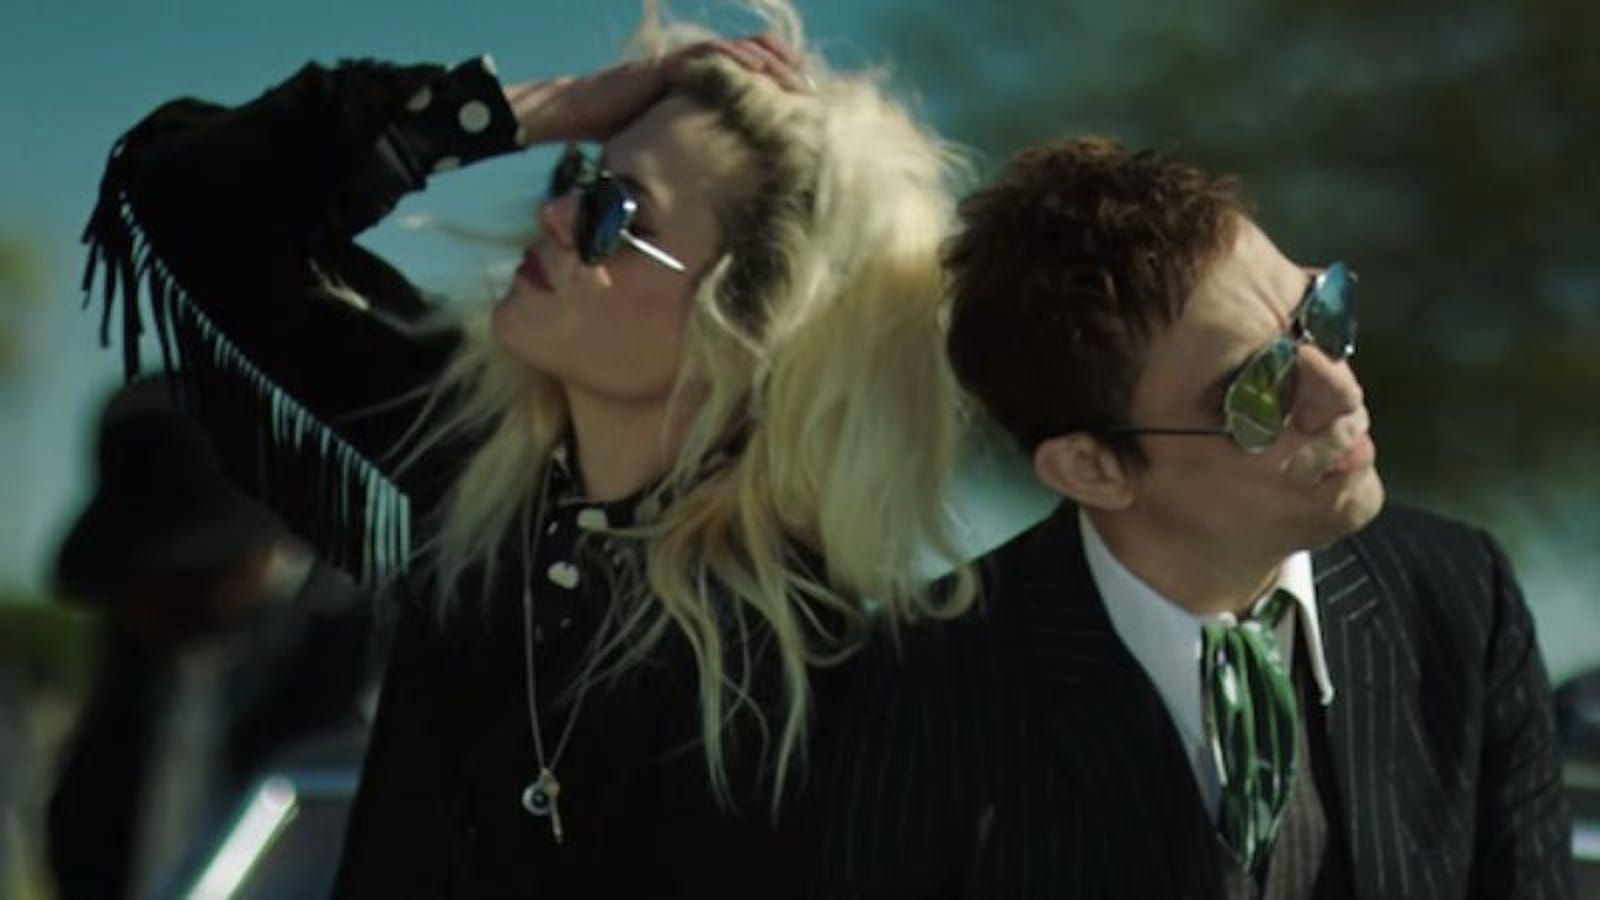 The Kills return with a new album and video